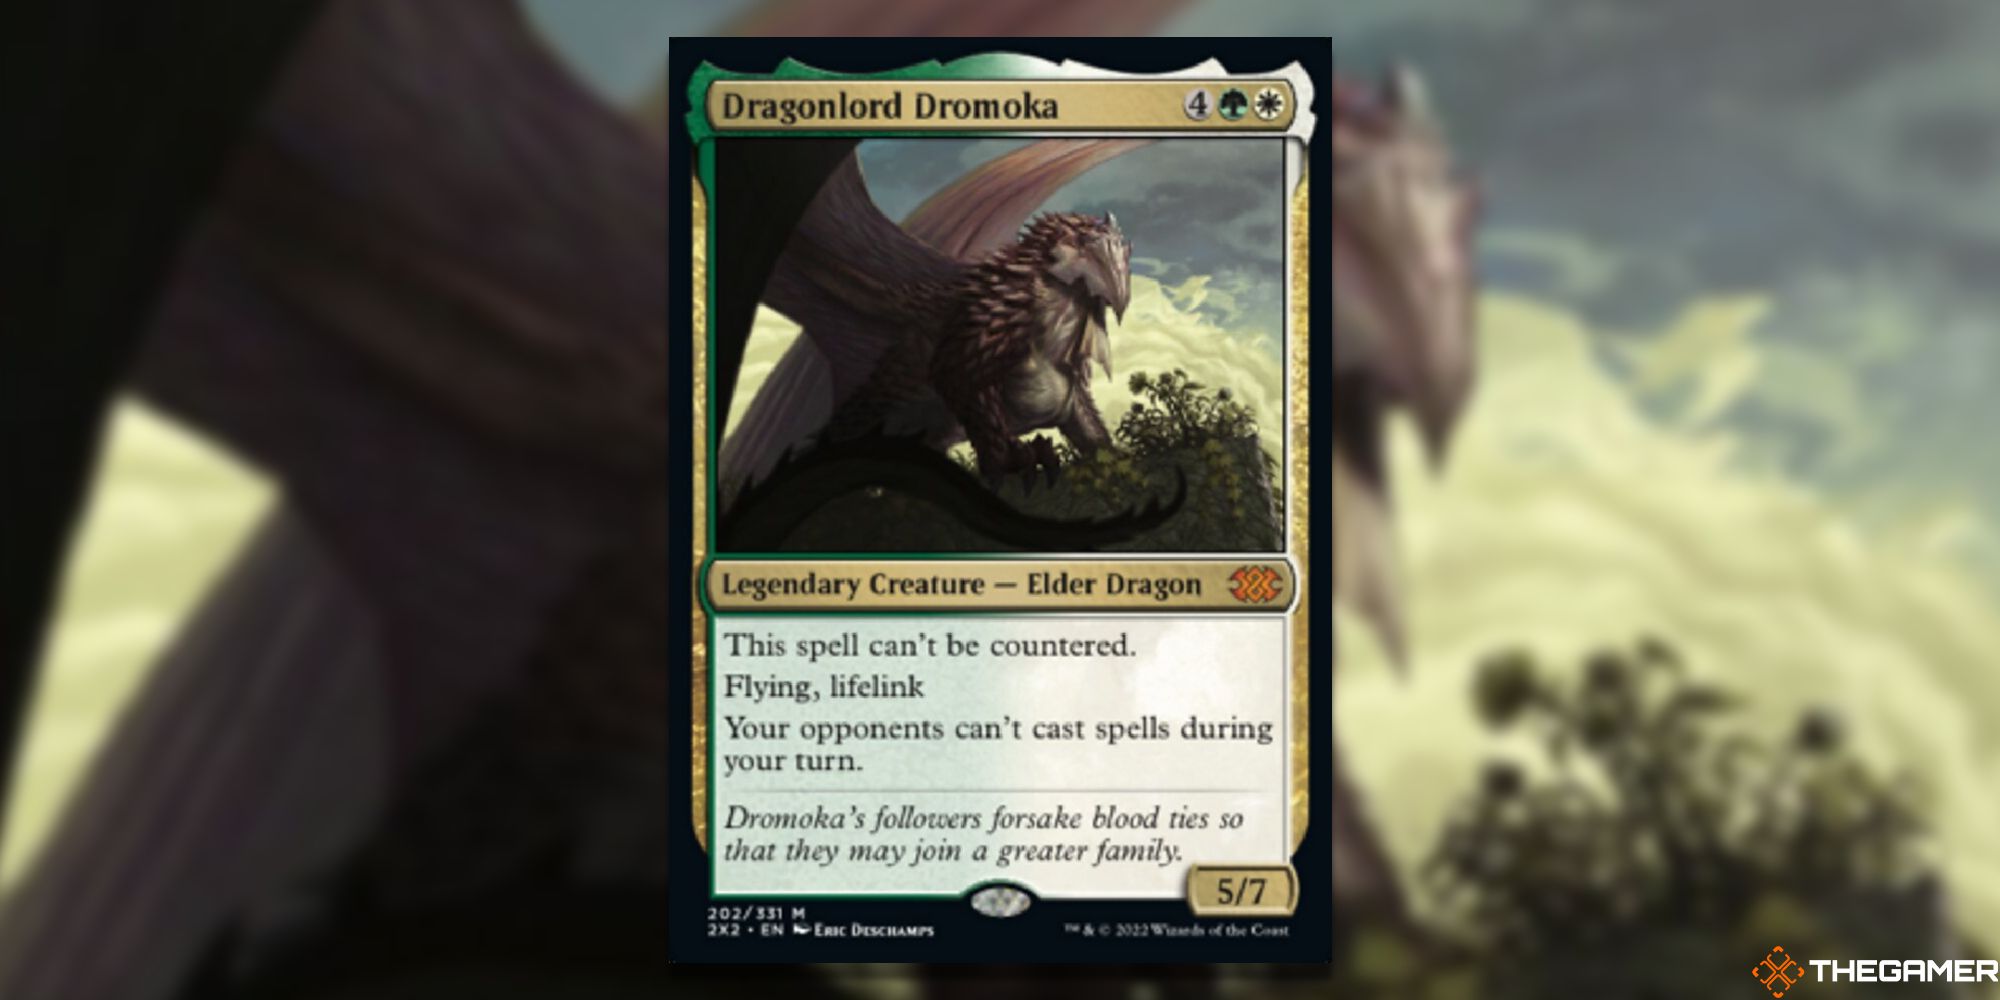 Magic: The Gathering Dragonlord Dromoka full card with background